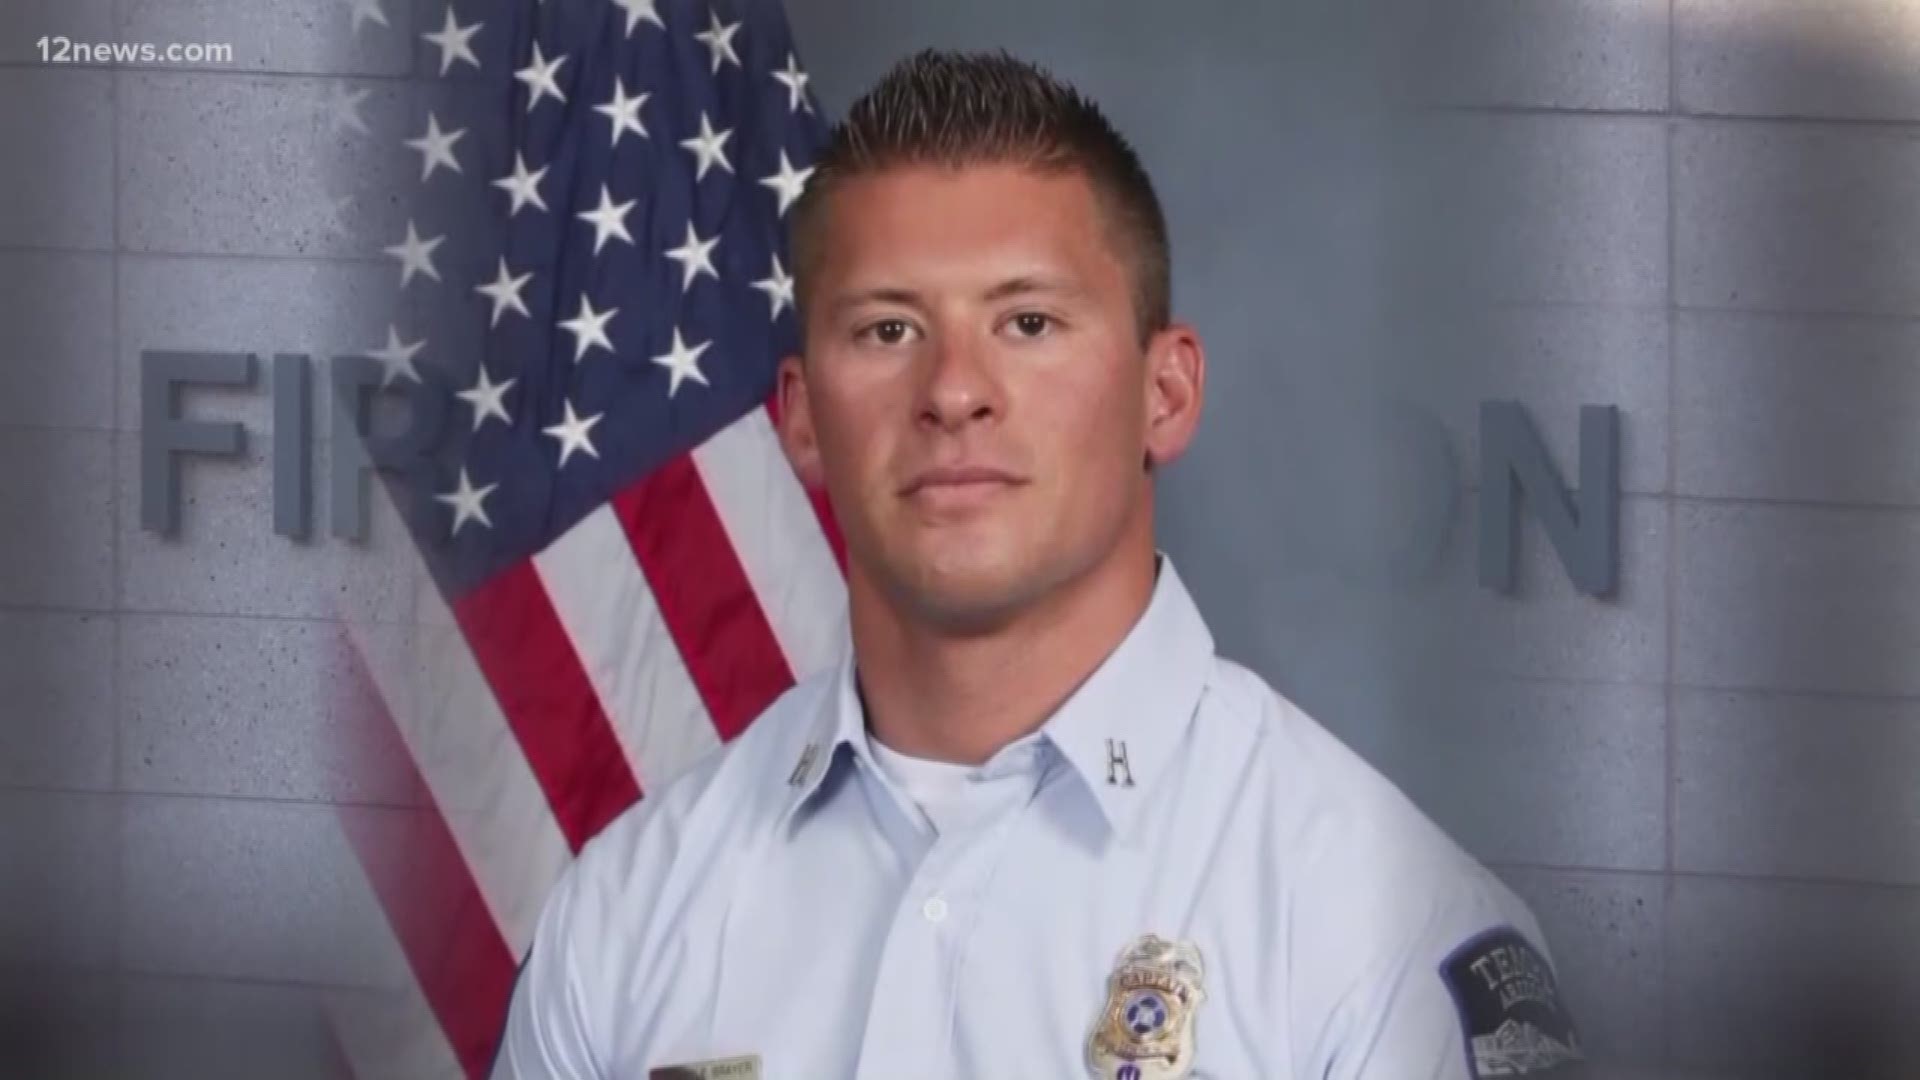 A murder trial has begun in the shooting death of Tempe Fire Captain Kyle Brayer after a night of drinking in Old Town Scottsdale. Prosecutors claim the suspect killed Brayer during a verbal altercation, but the defense says Brayer was physically aggressive, and that the suspect fired his gun in self-defense.